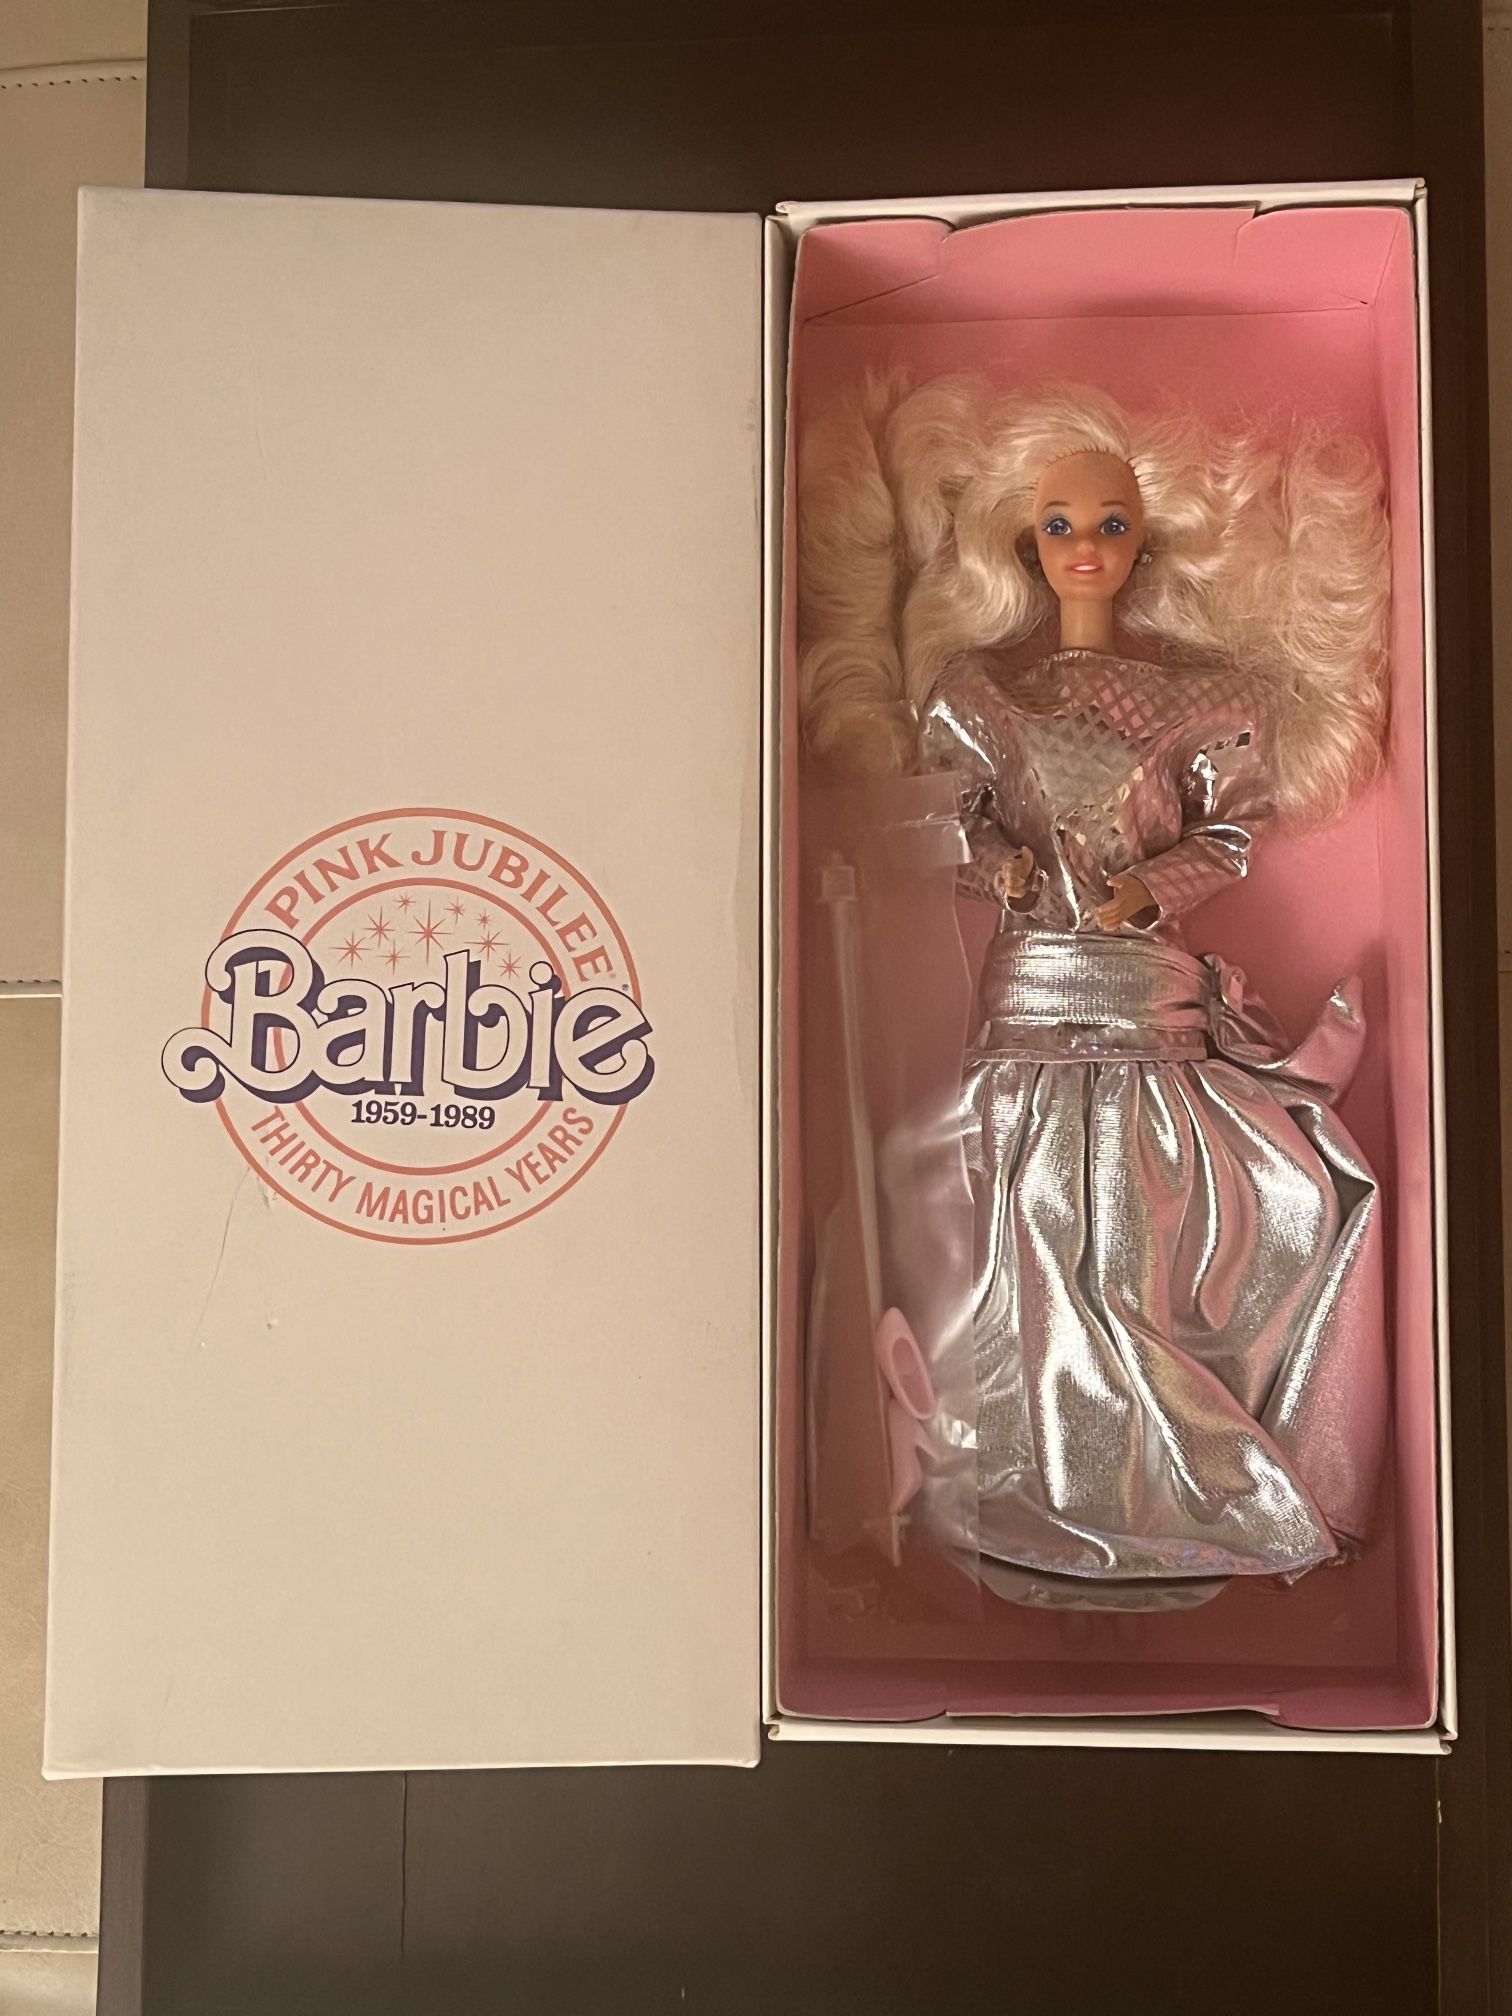 Pink Jubilee Barbie VERY RARE 1989 - 30th Anniversary Doll LTD EDITION 1200 IN THE WORLD